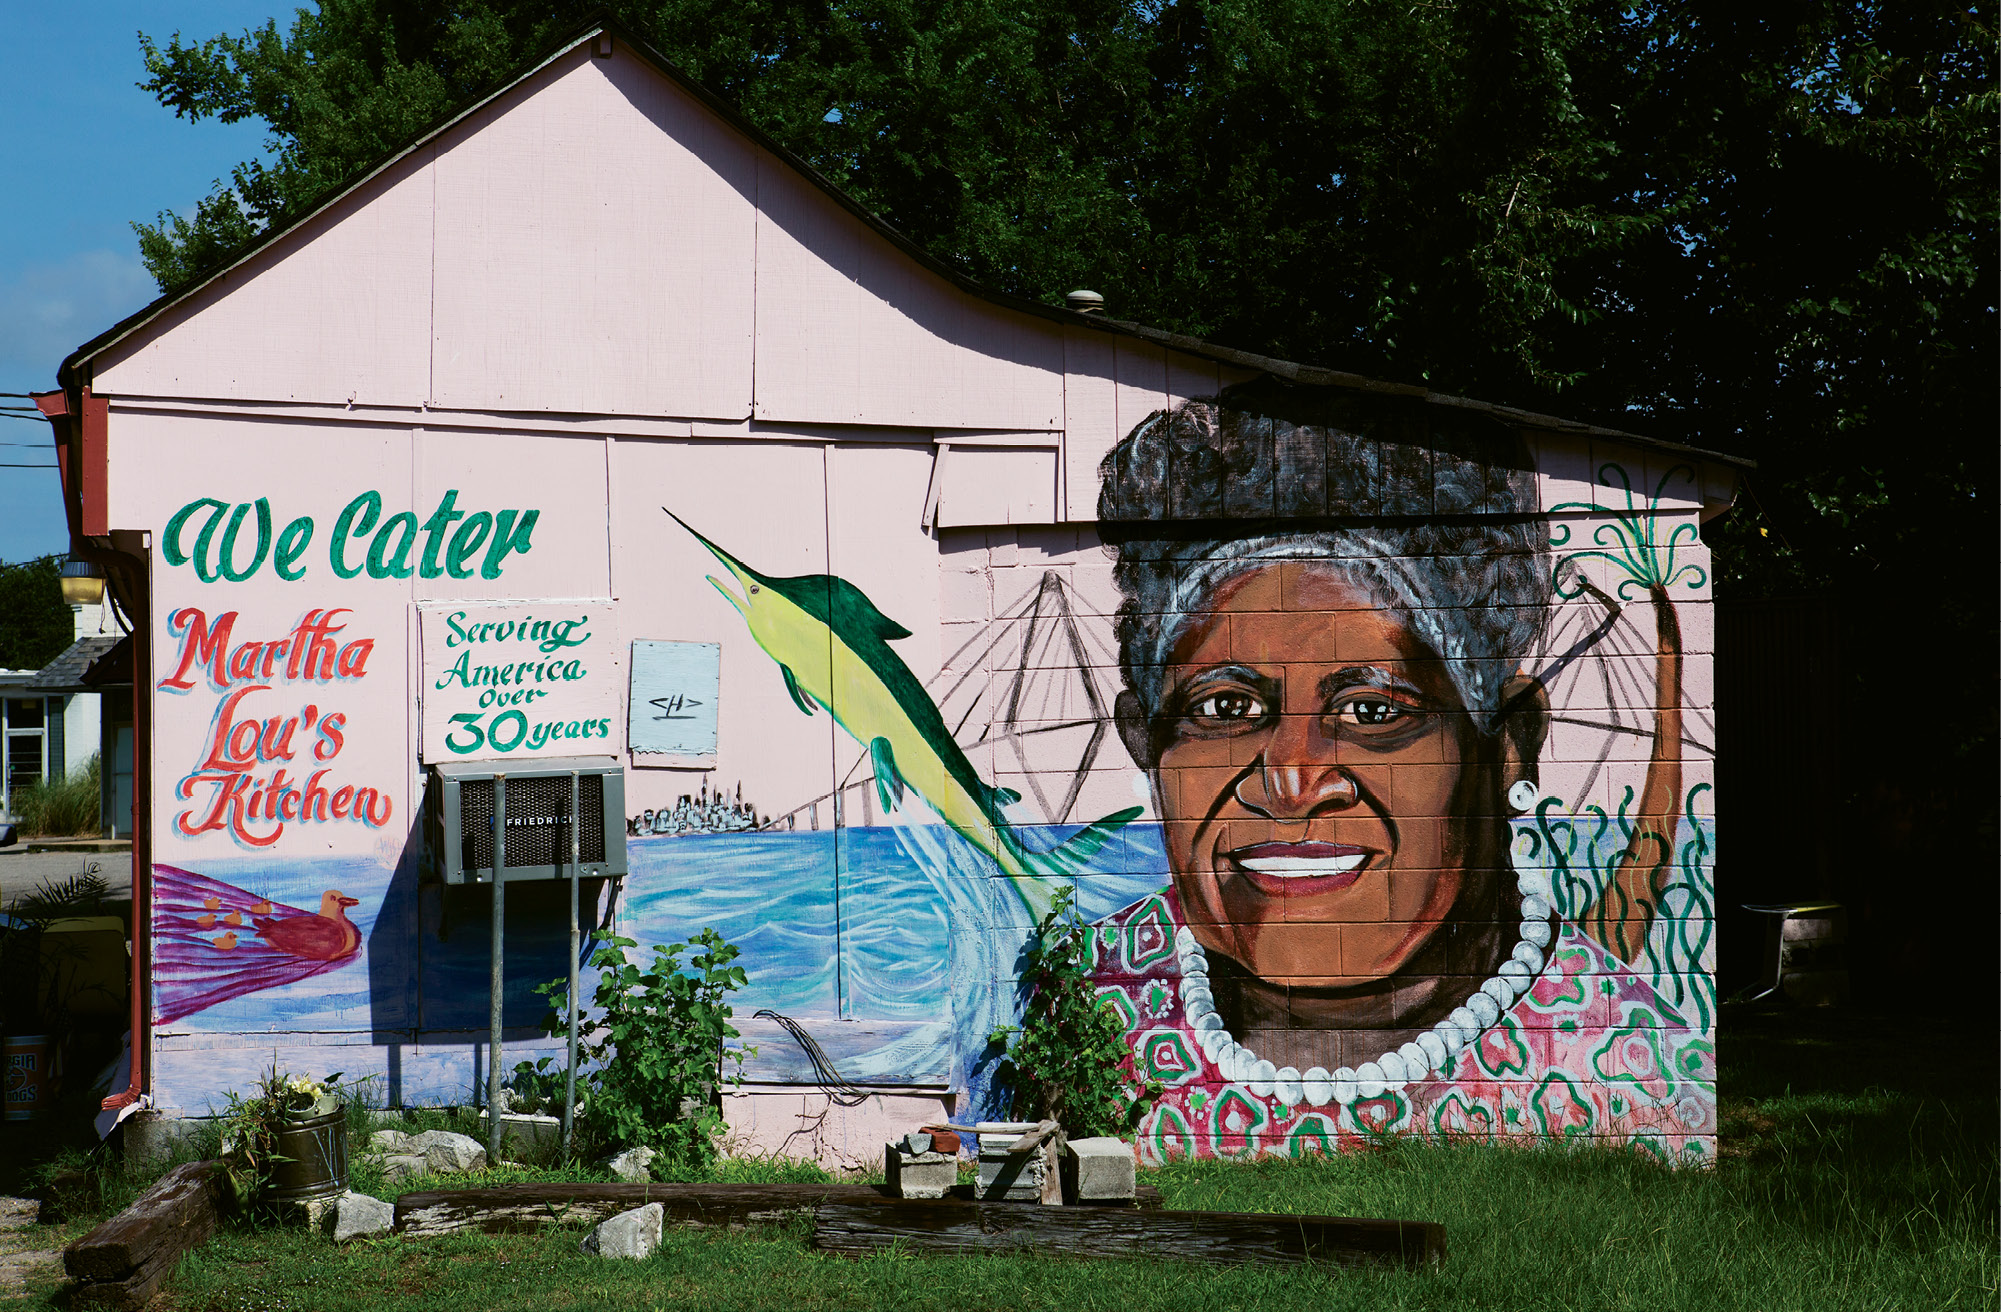 Untitled  by Charles Desaussure  2012  Martha Lou’s Kitchen  (1068 Morrison dr., Peninsula)  for decades, locals and visitors alike have sought out the famous pink cinder-block building for the addictive fried chicken inside. in 2012, the colorful exterior got an upgrade, an immense portrait of Martha Lou herself, painted by late Lowcountry artist Charles Desaussure, who passed away the following year. His work can be found on and in many area businesses, including Ravenel Seafood and Red Piano Too Art Gallery in St. Helena.